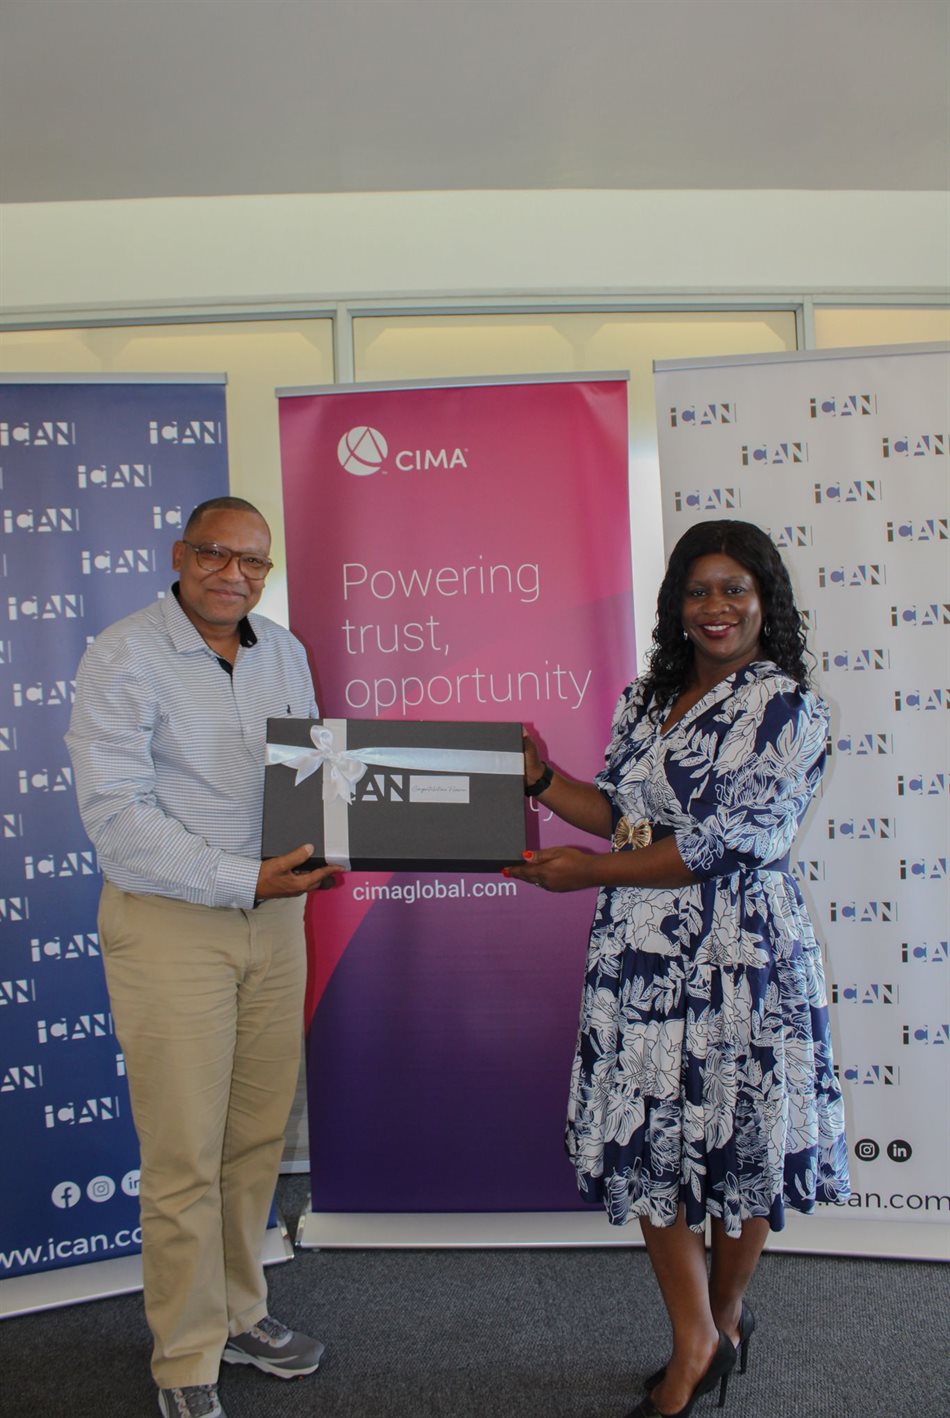 From left to right, Florian Hartzenberg, ACMA, CGMA, CA(NAM), welcomed to the ICAN family with a certificate presented by the ICAN CEO, Fenni Nghikevali, CA(NAM).